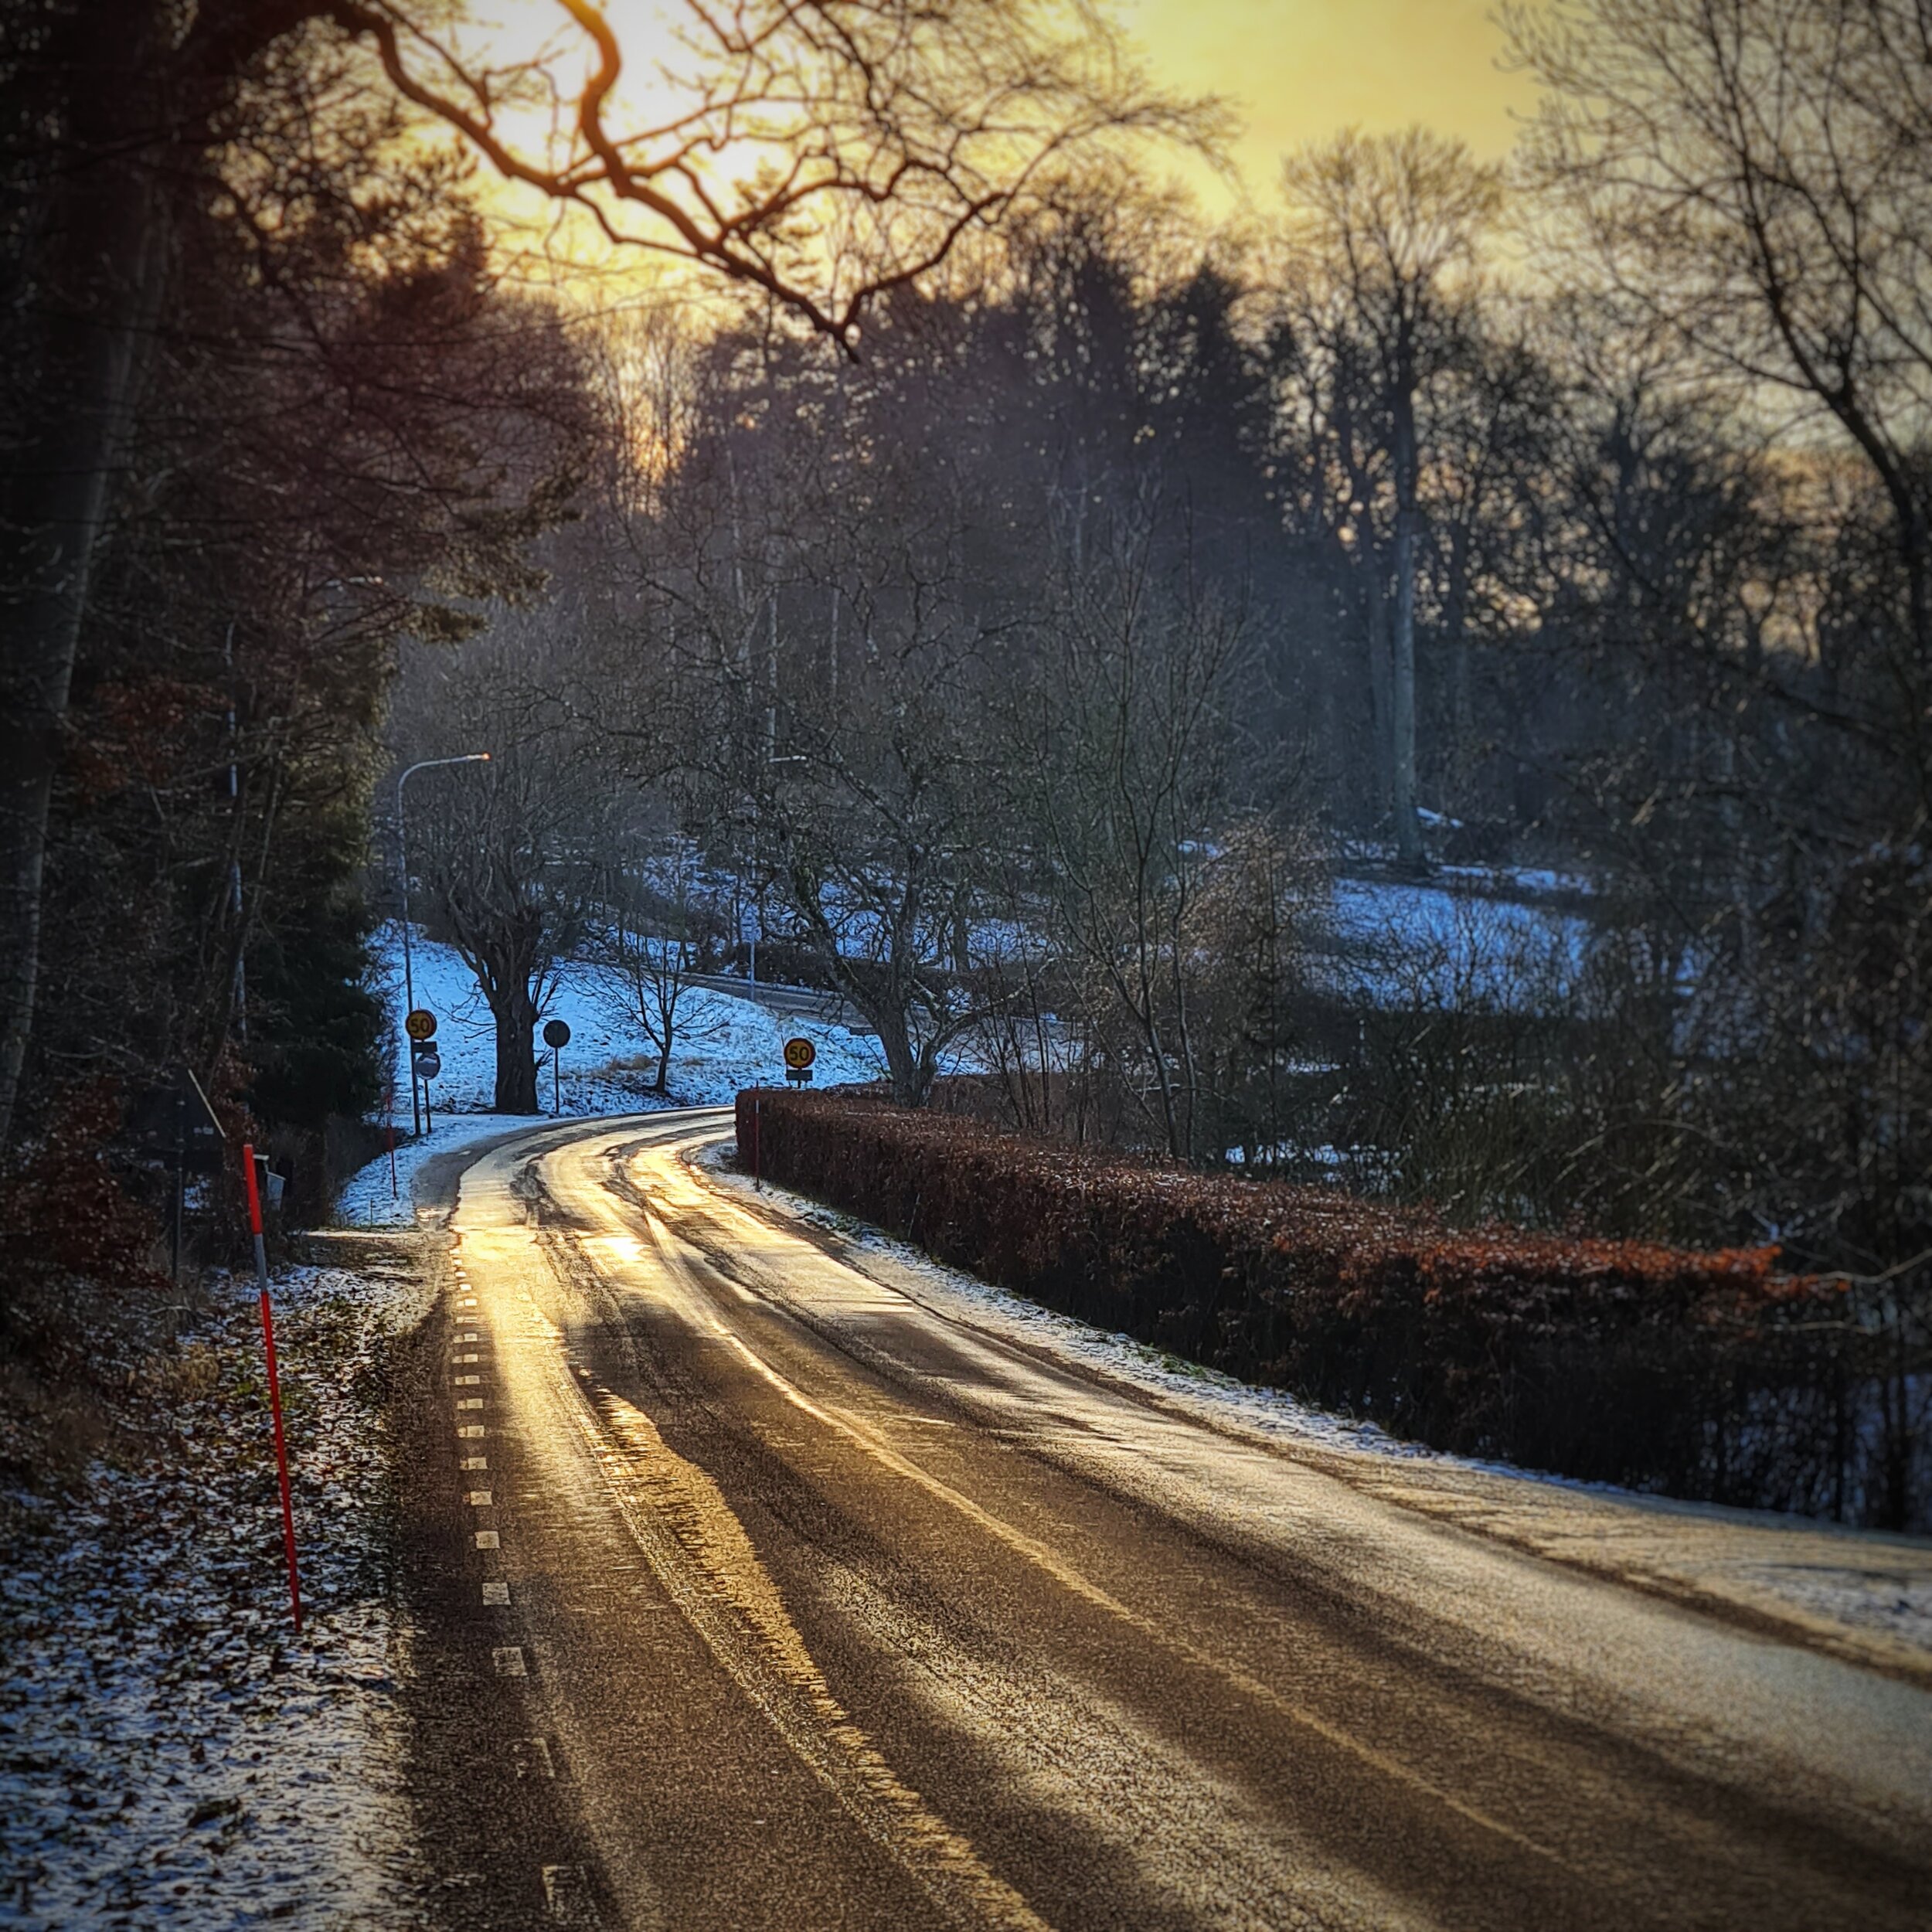 Day 33 - February 2: Golden Road